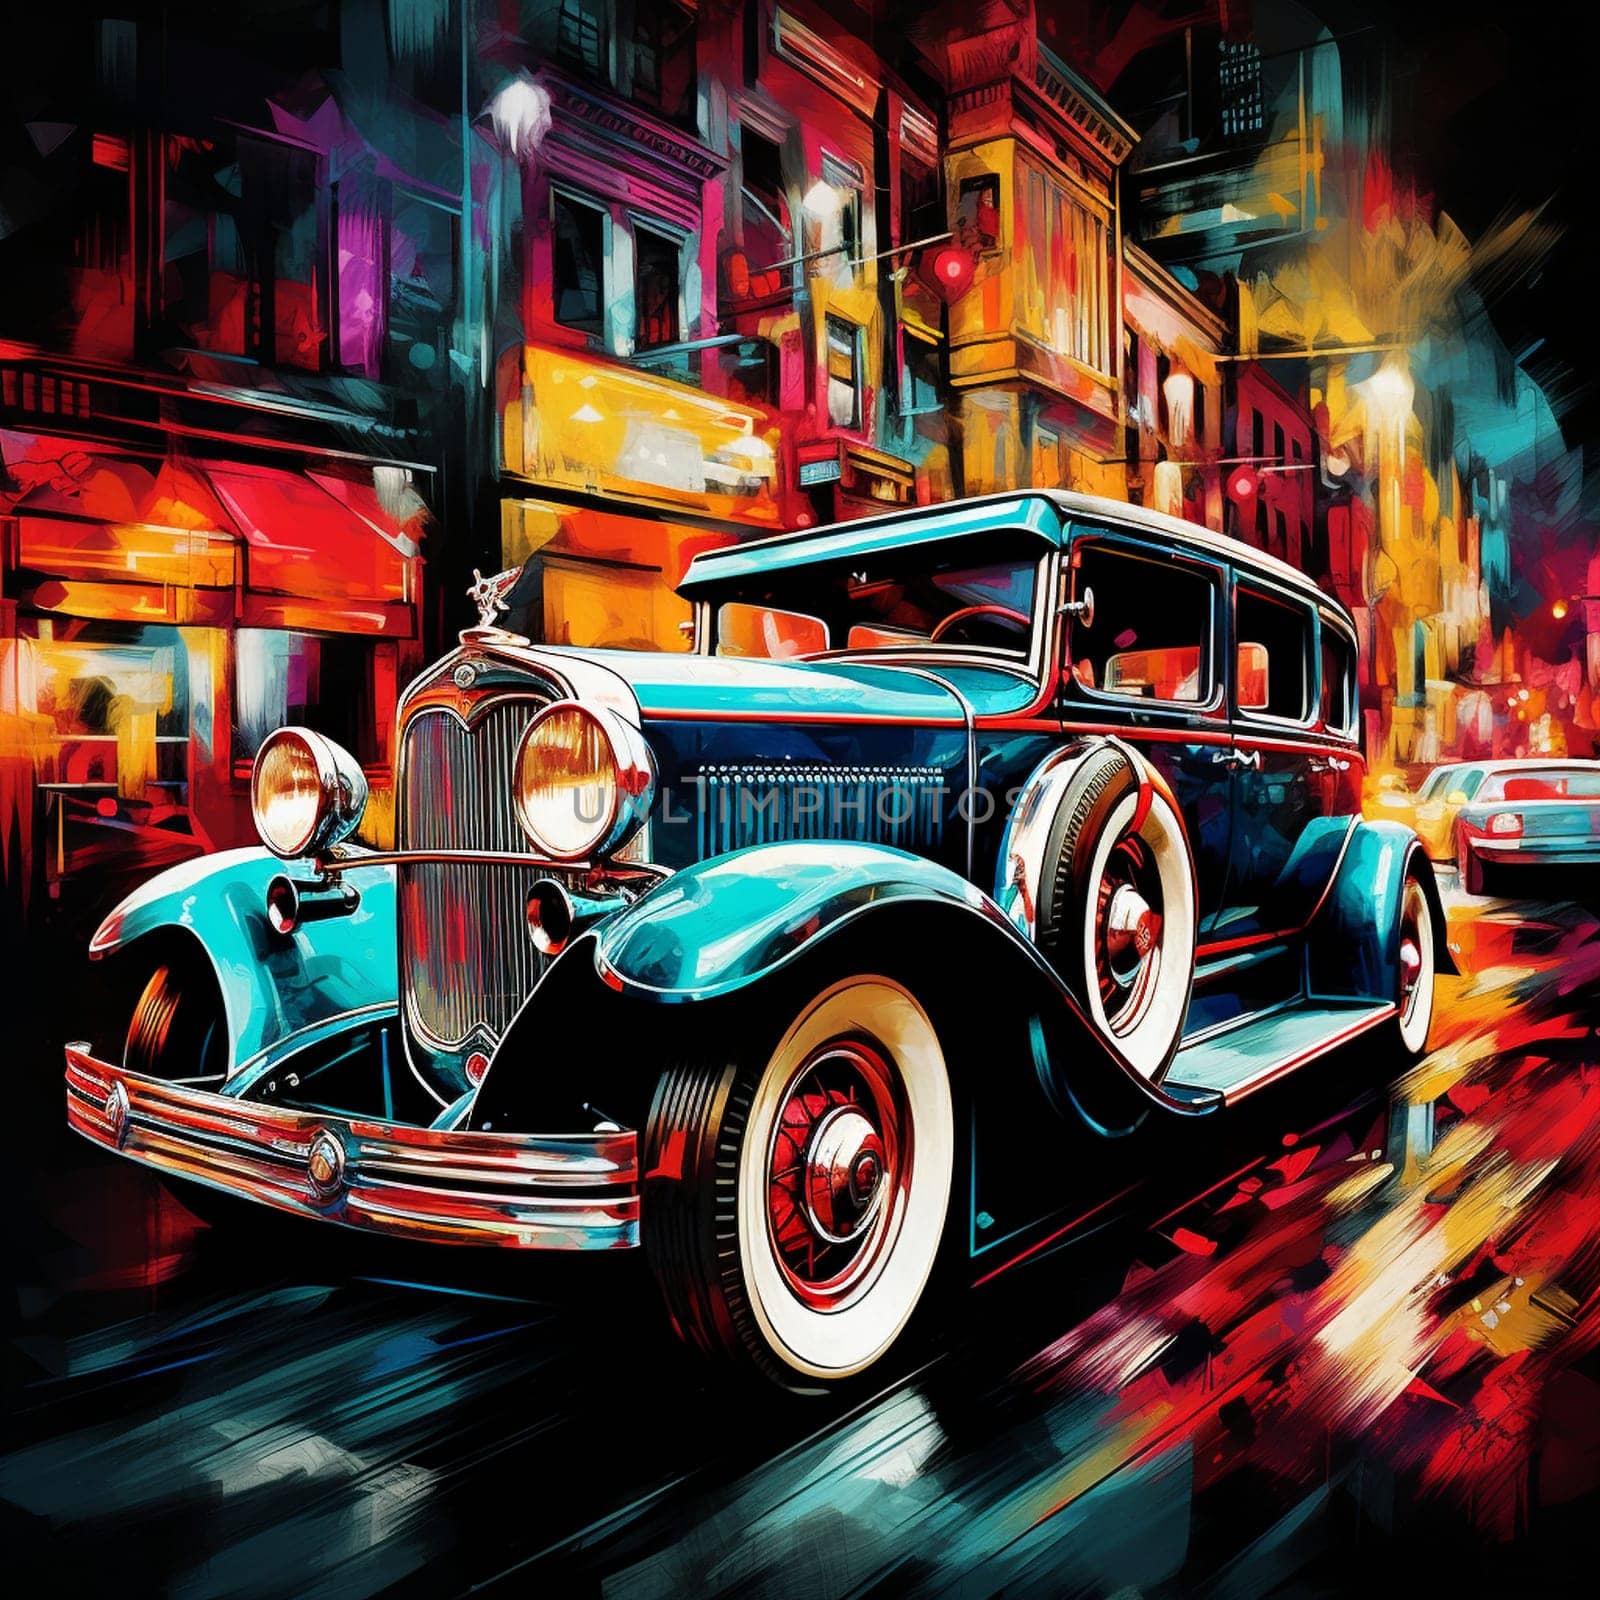 Classic Lines, Endless Inspiration: Vintage Car Artistry by Sahin